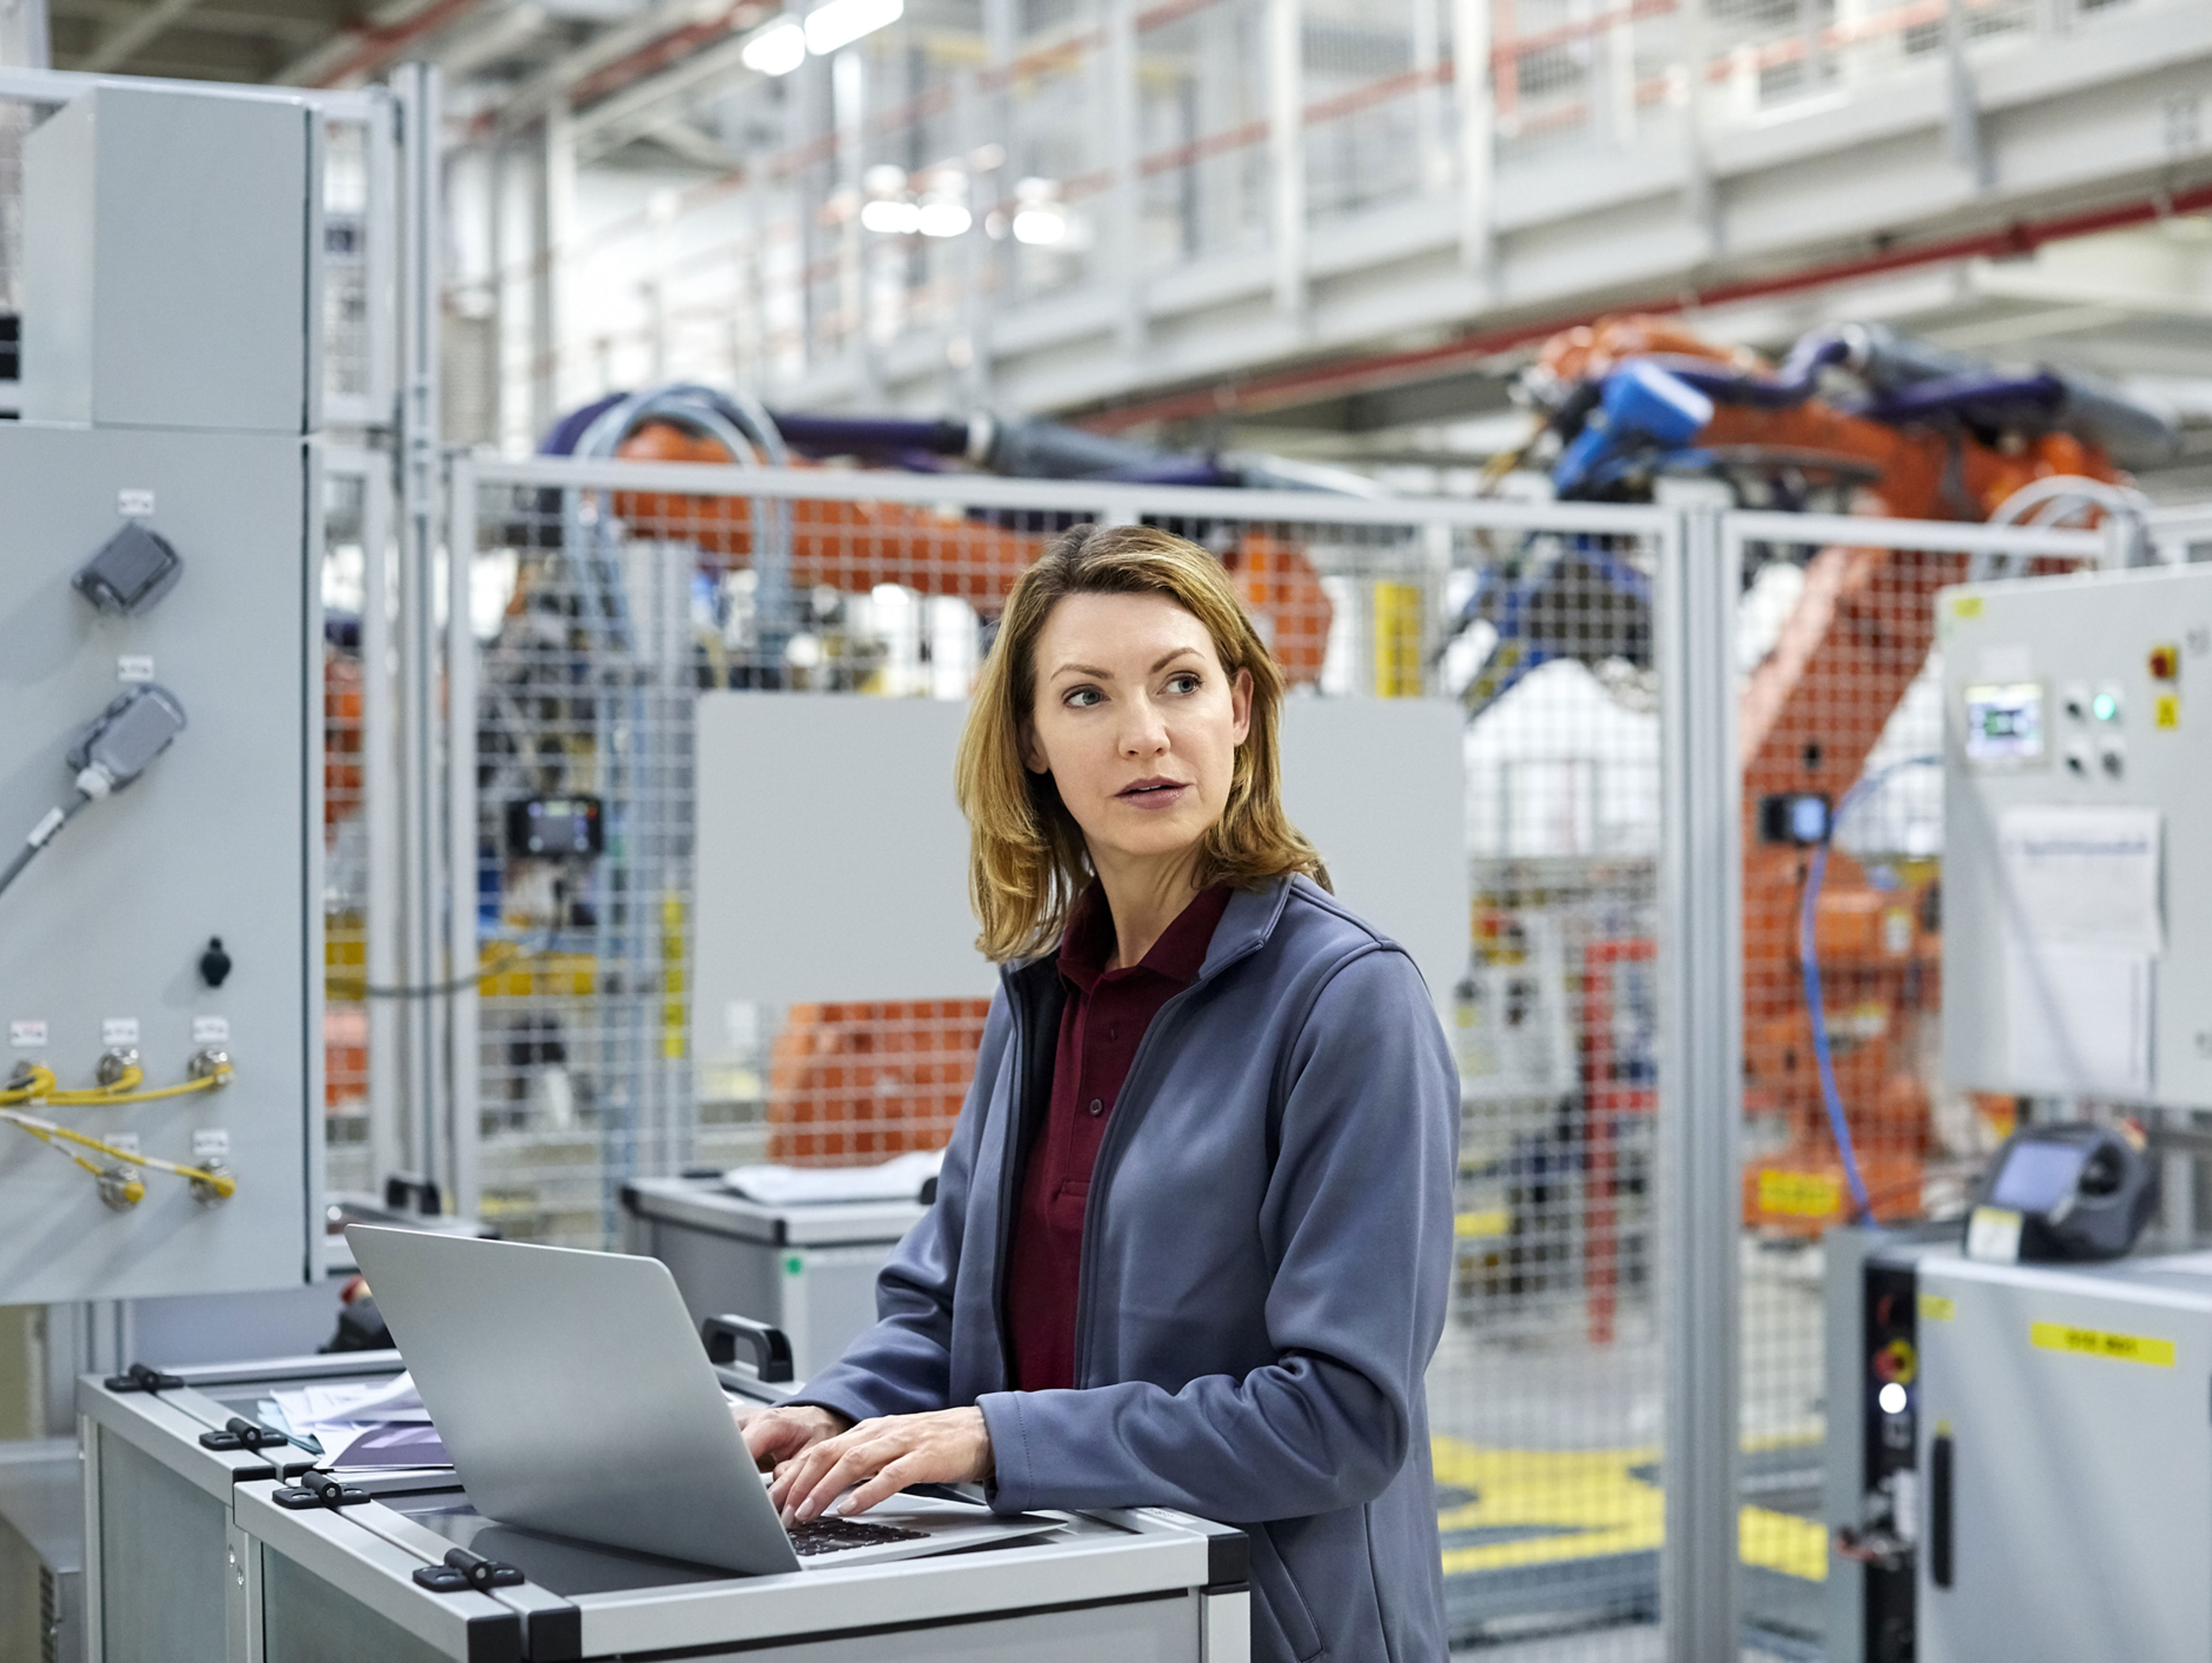 A picture of a woman working at a laptop in a distribution centre